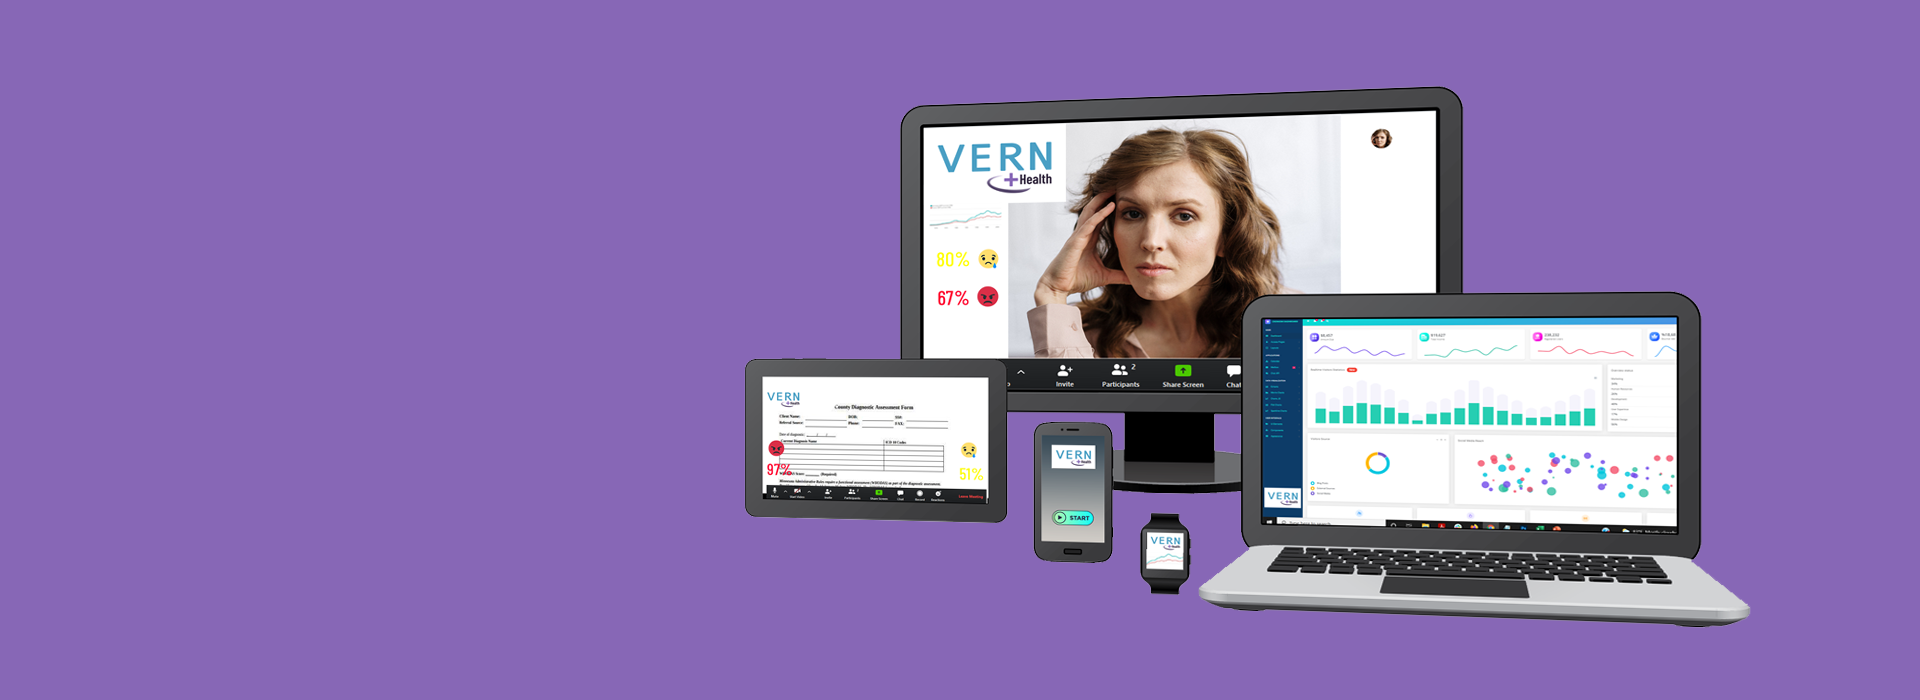 VERN Health Product Features Slider26